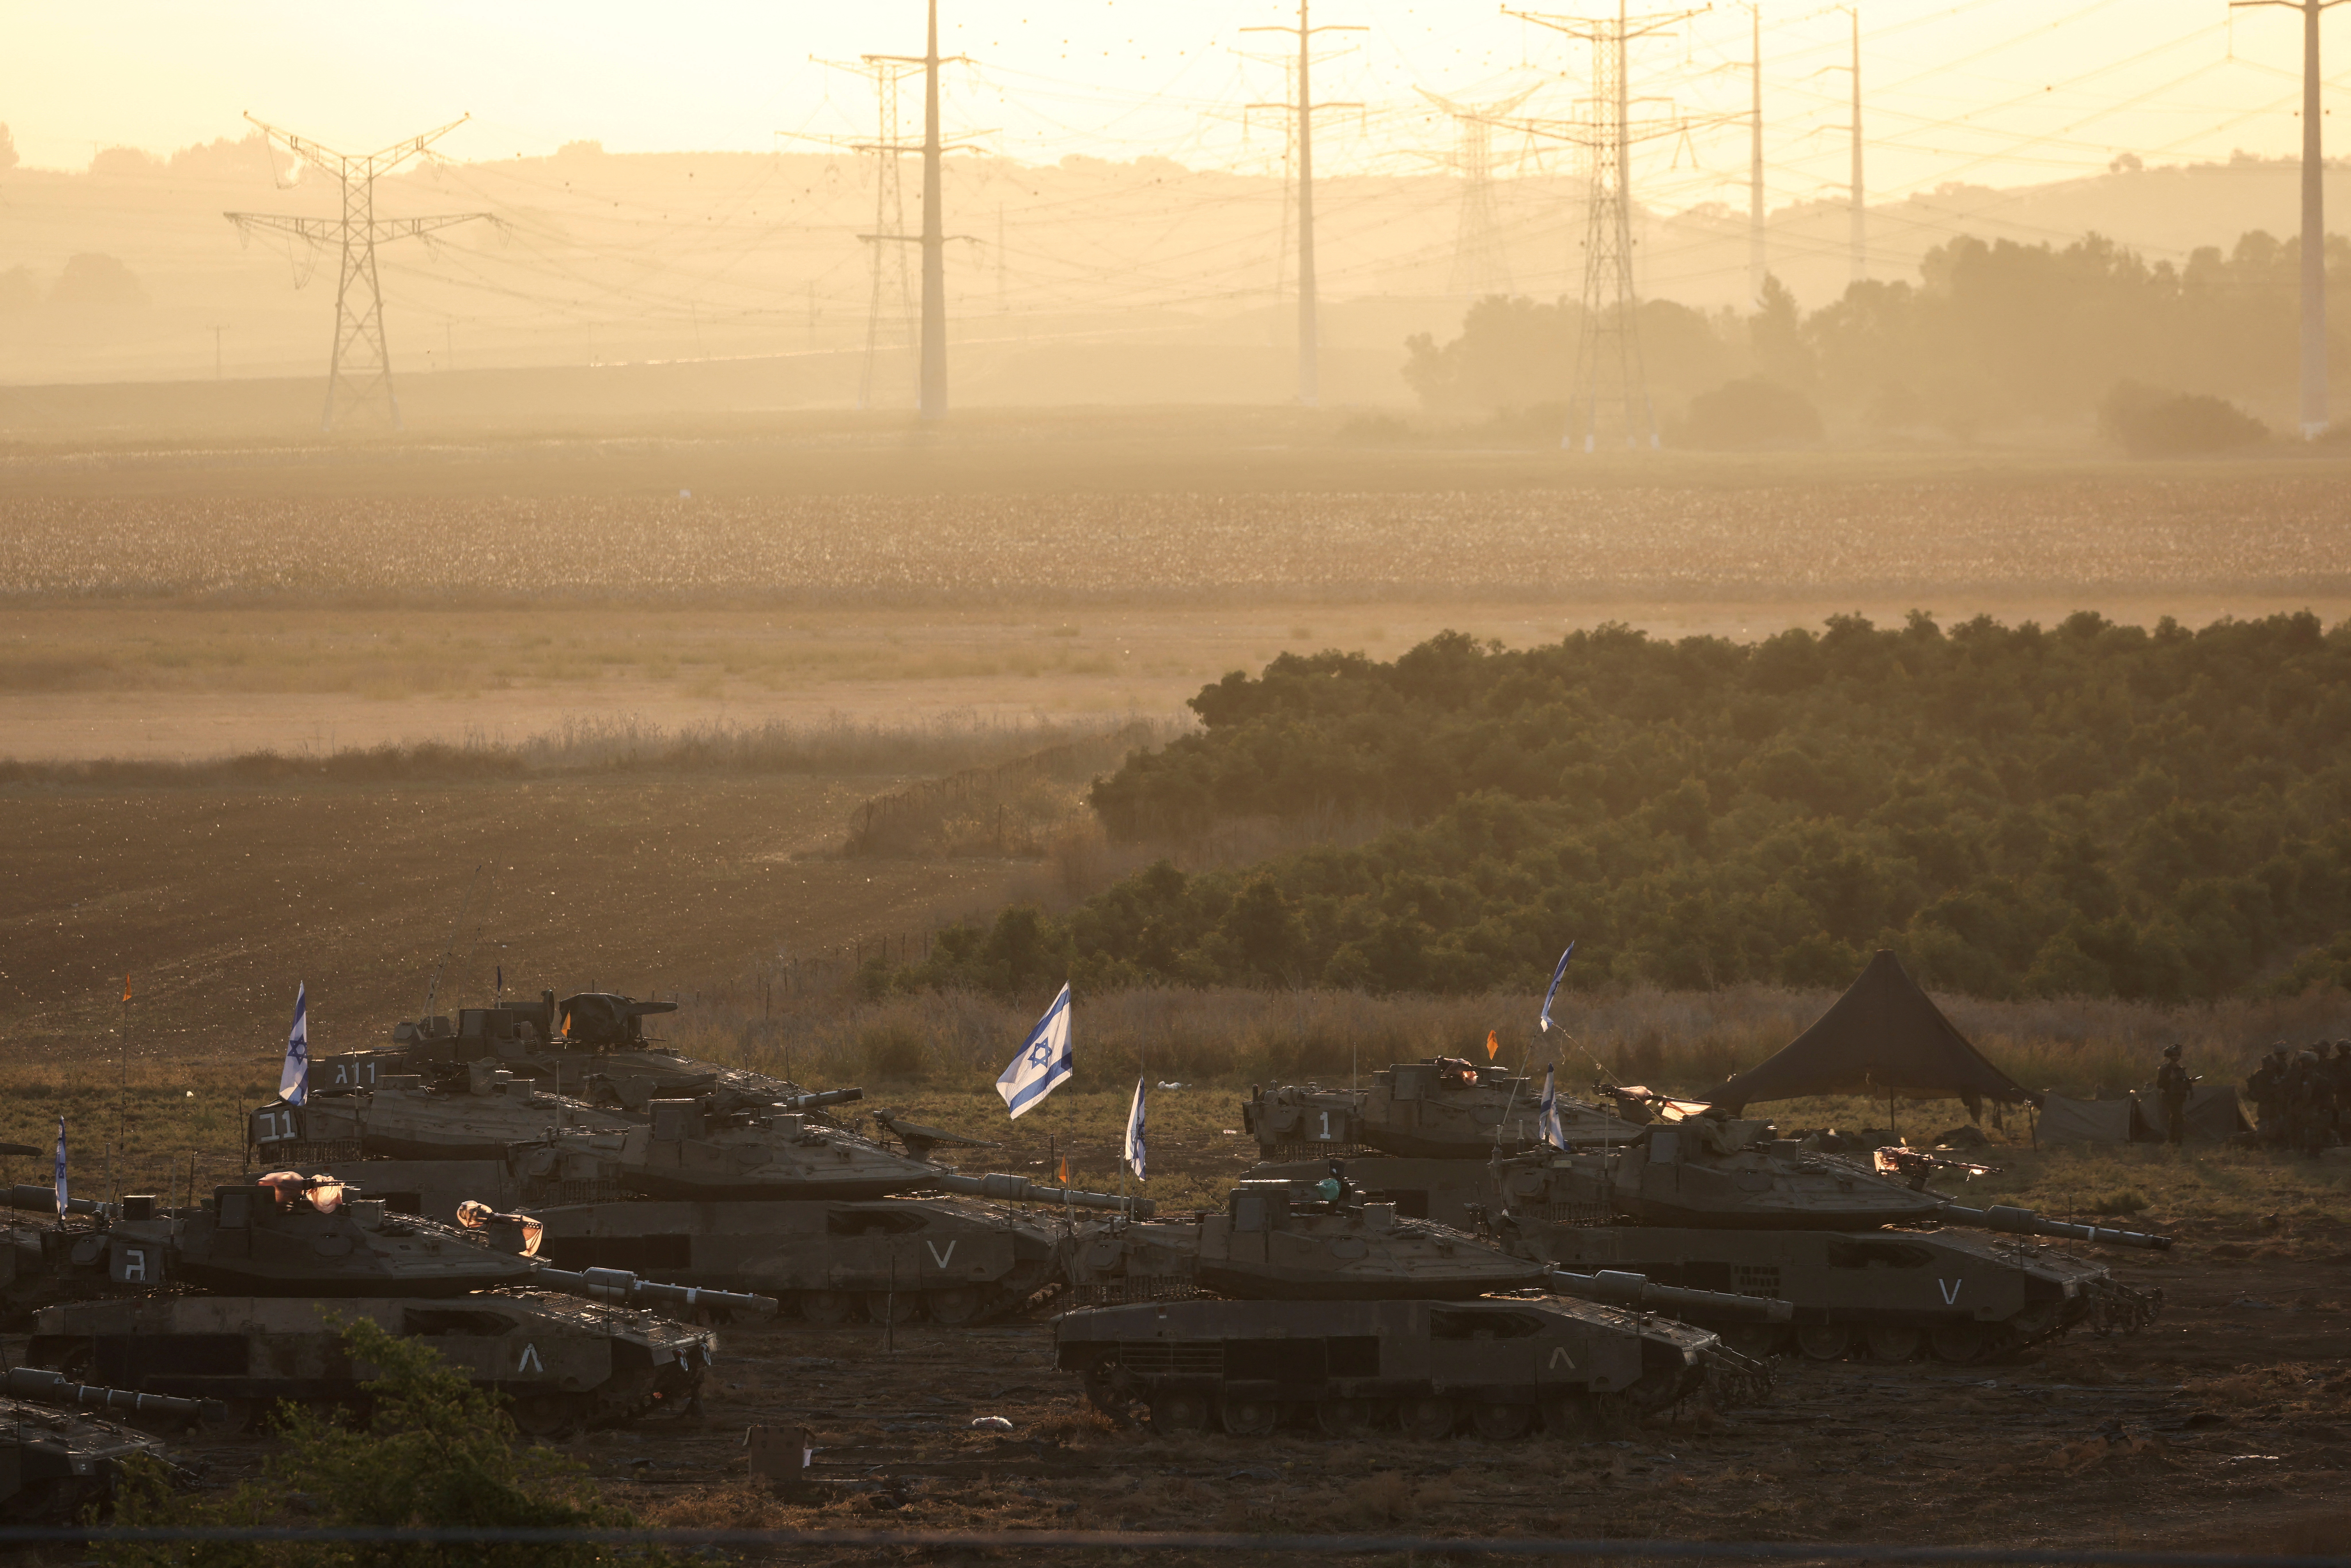 Israeli tanks and military at Israel's border with the Gaza Strip, in southern Israel